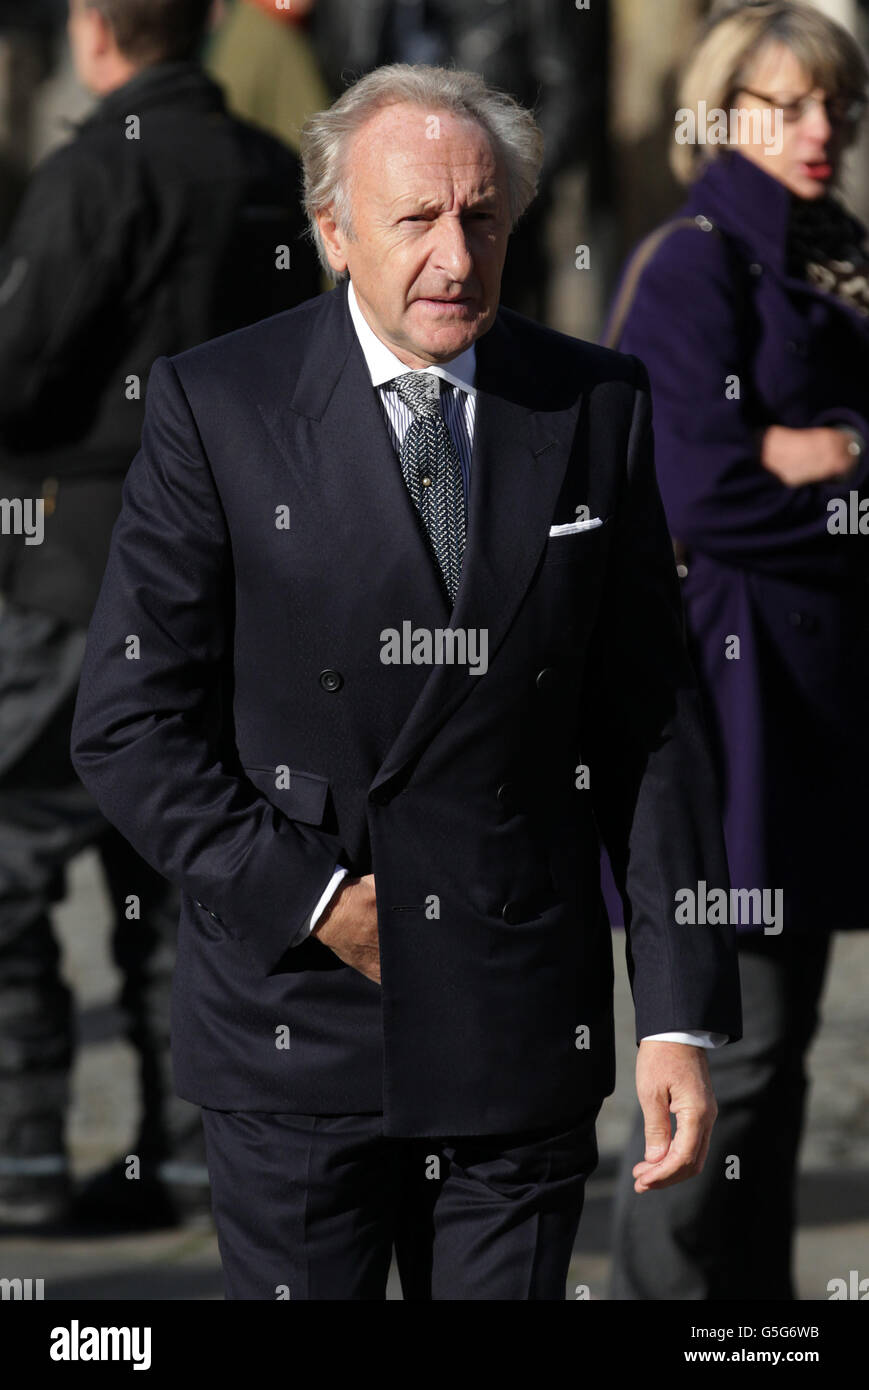 British retail entrepreneur Harold Tillman arrives at St Paul's Cathedral in London, for the memorial service of hairdresser Vidal Sassoon who died in May. Stock Photo